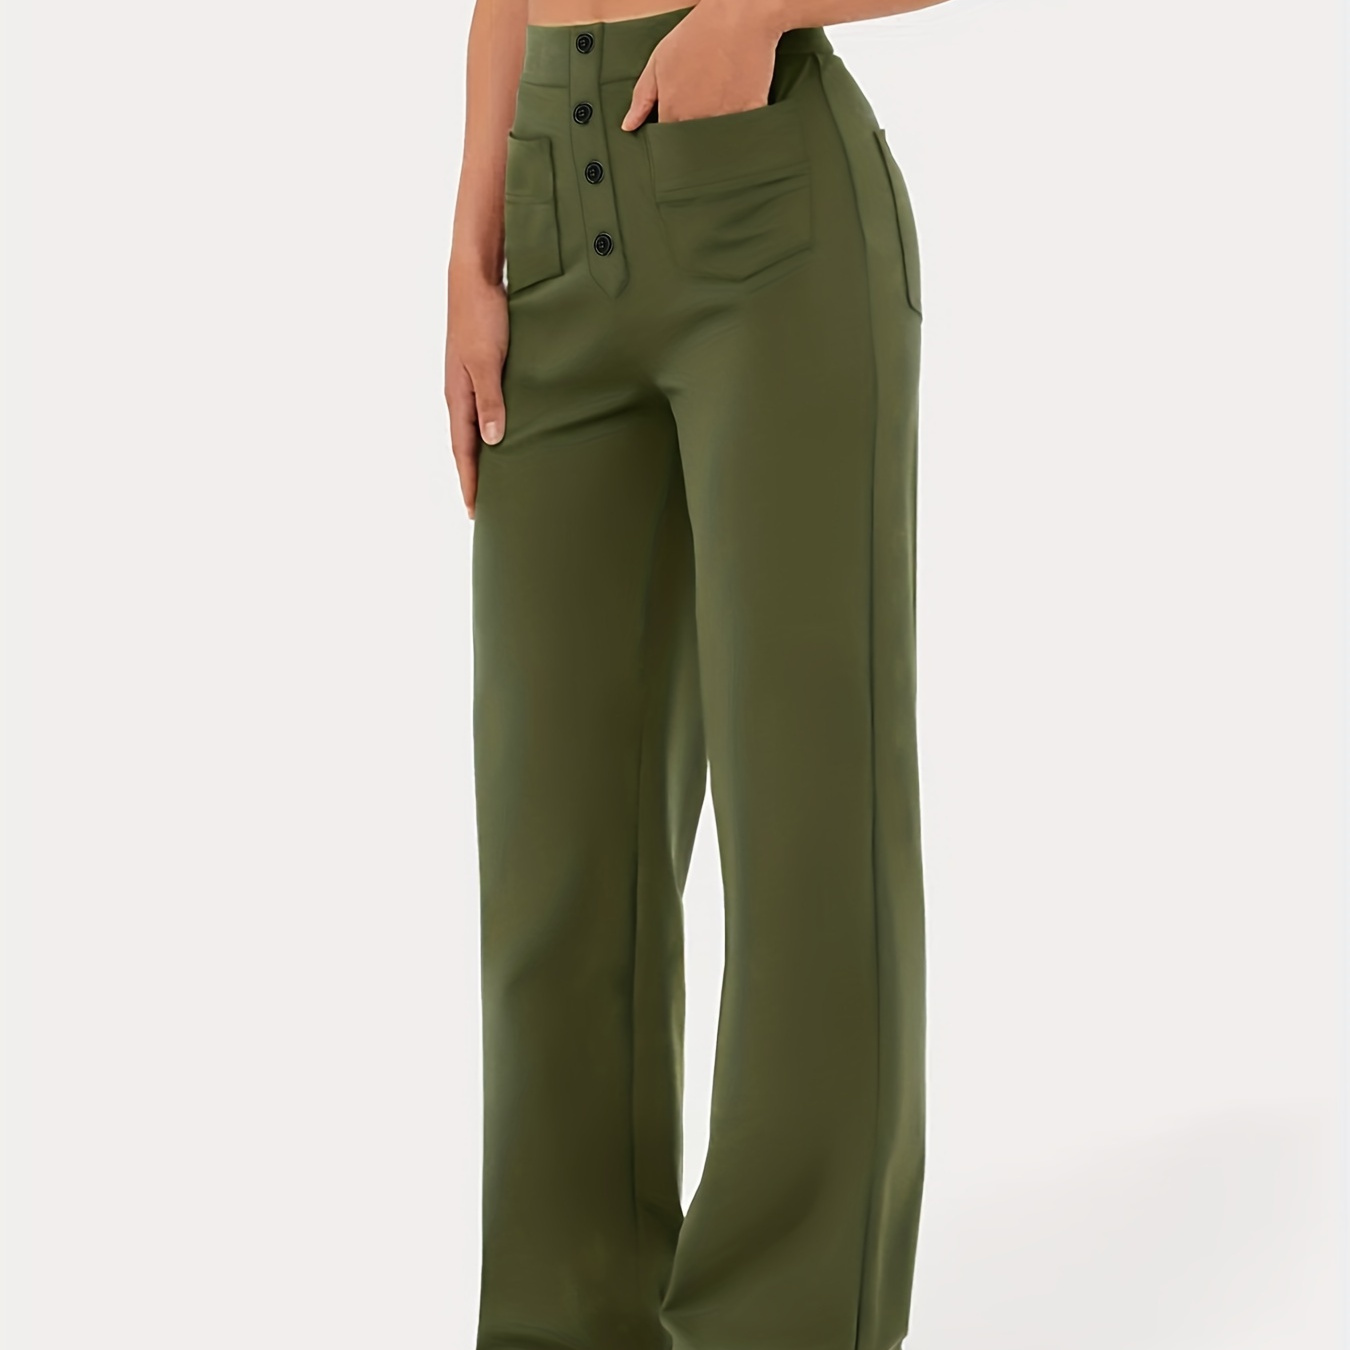 

Women's Athletic High-waisted Buttoned Cargo Pants With Multiple Pockets, Straight Leg Casual Trousers, Sporty Style